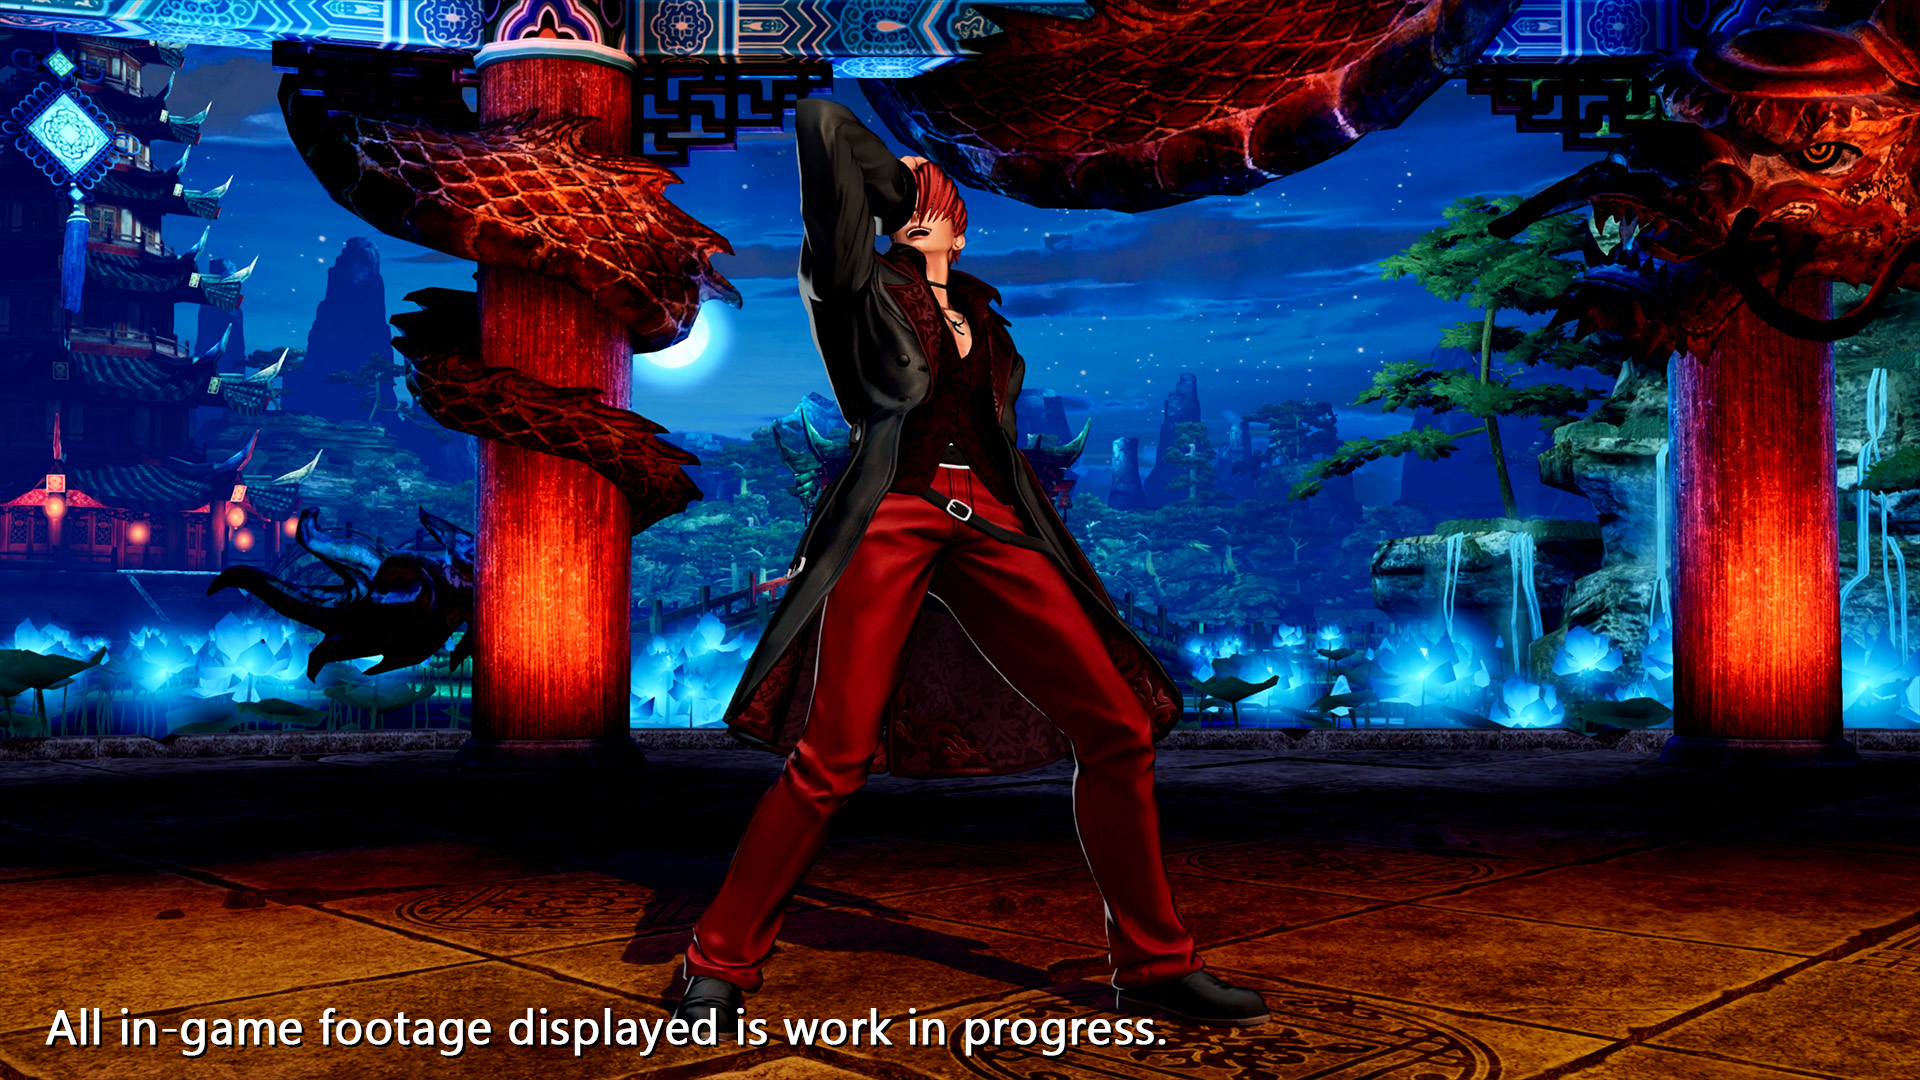 Iori Yagami in King of Fighters 15 7 out of 21 image gallery